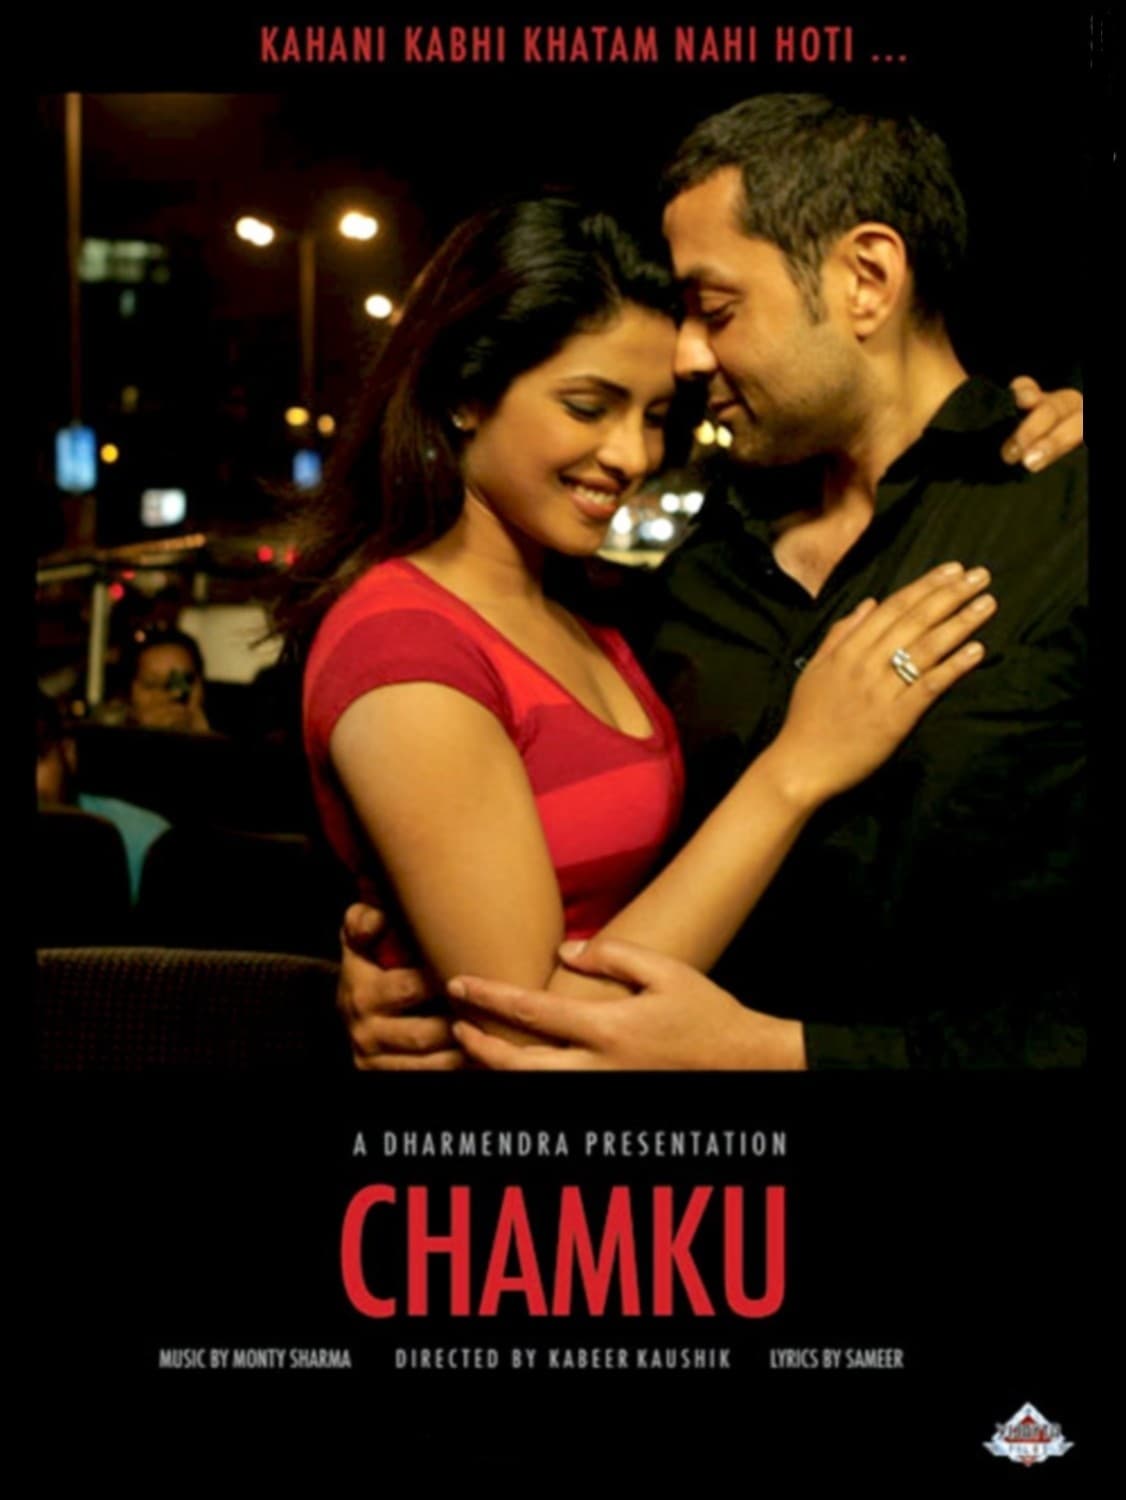 Poster for the movie "Chamku"